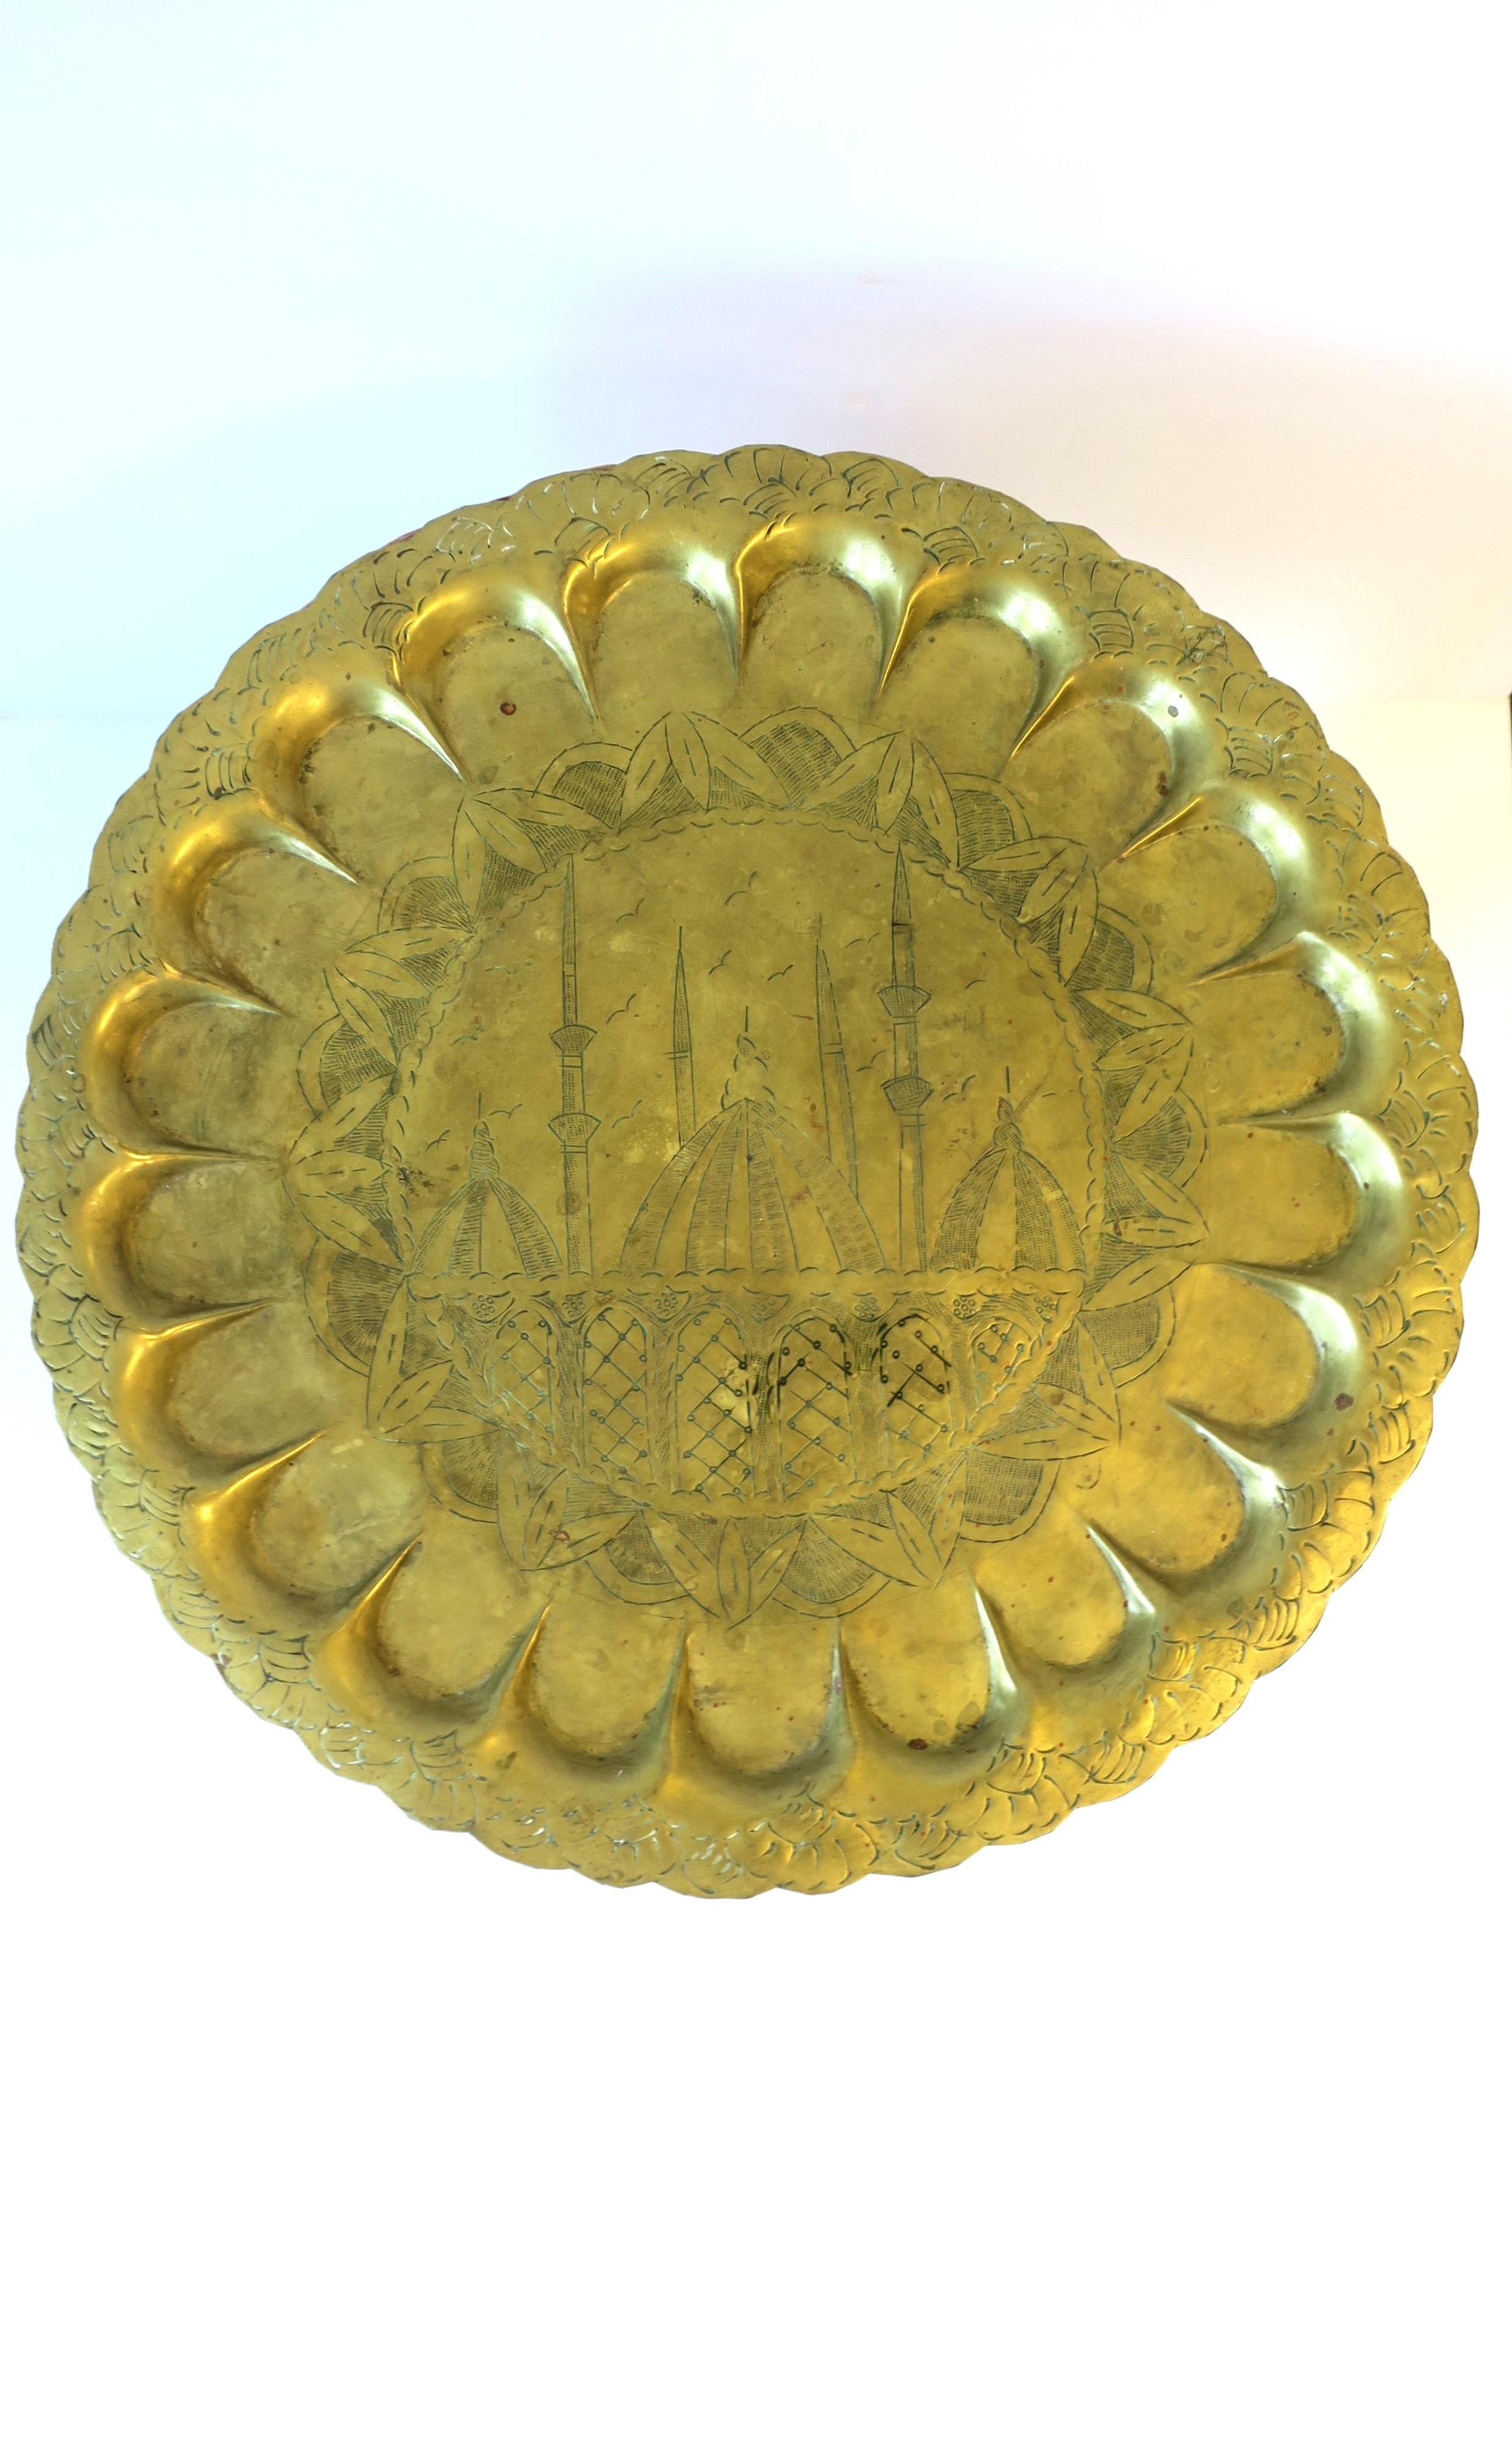 A round brass serving tray or decorative wall art piece, circa early to mid-20th century. Brass tray is round with a Mughal or Moorish design. Great as a serving tray (as demonstrated) or as decorative wall art. Dimensions: 16.63